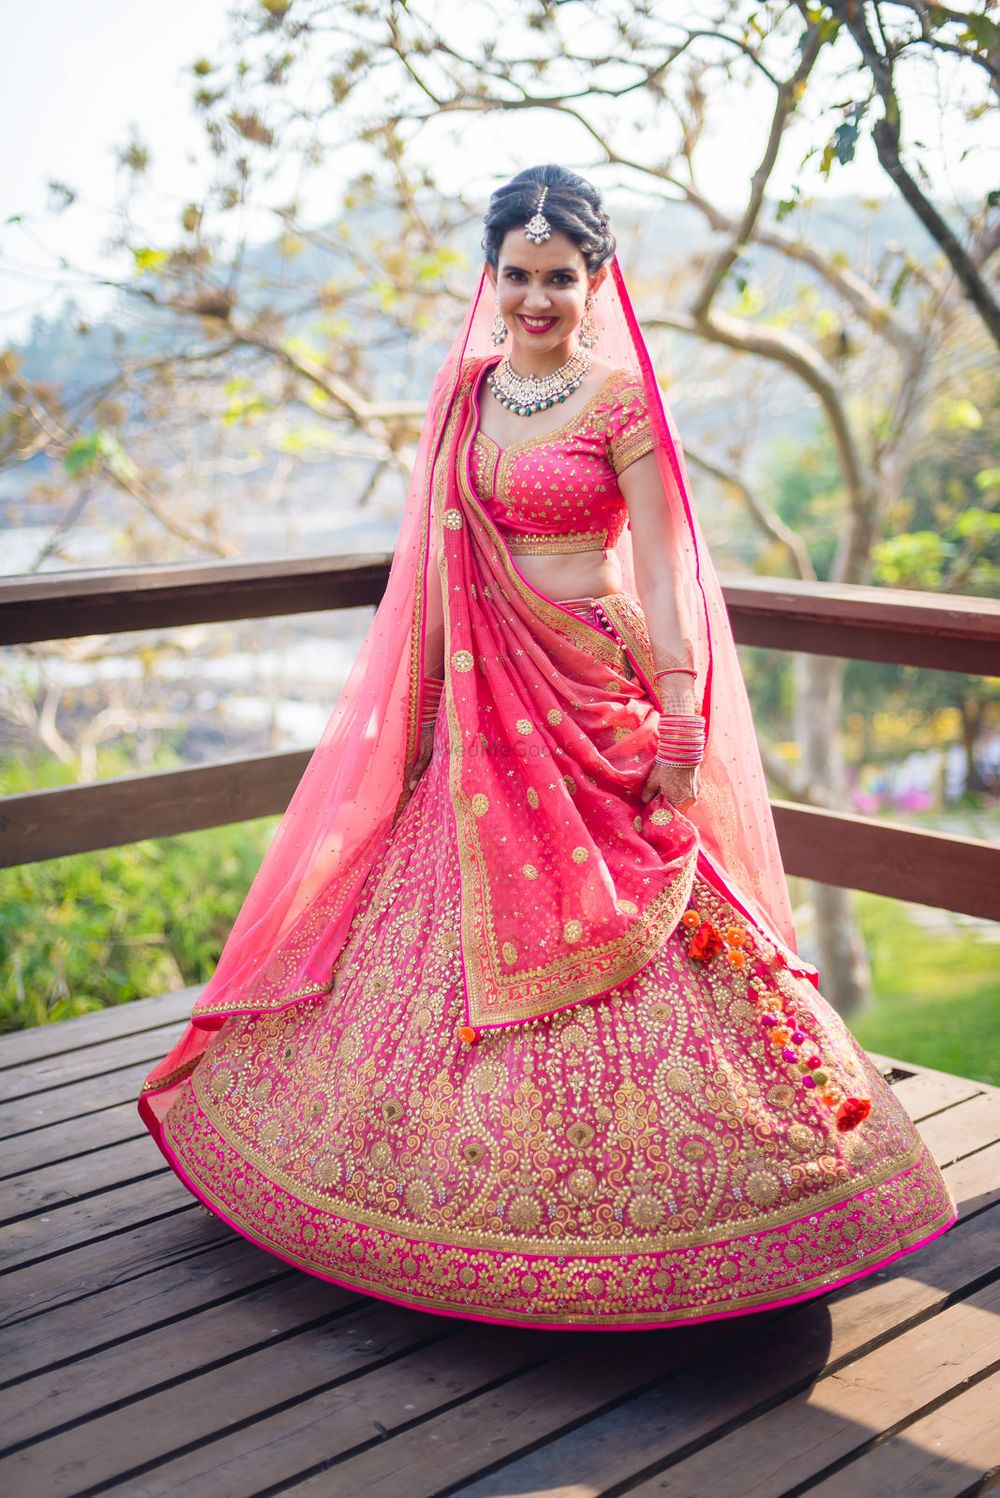 Photo of Bride twirling in coral lehenga with gold embroidery